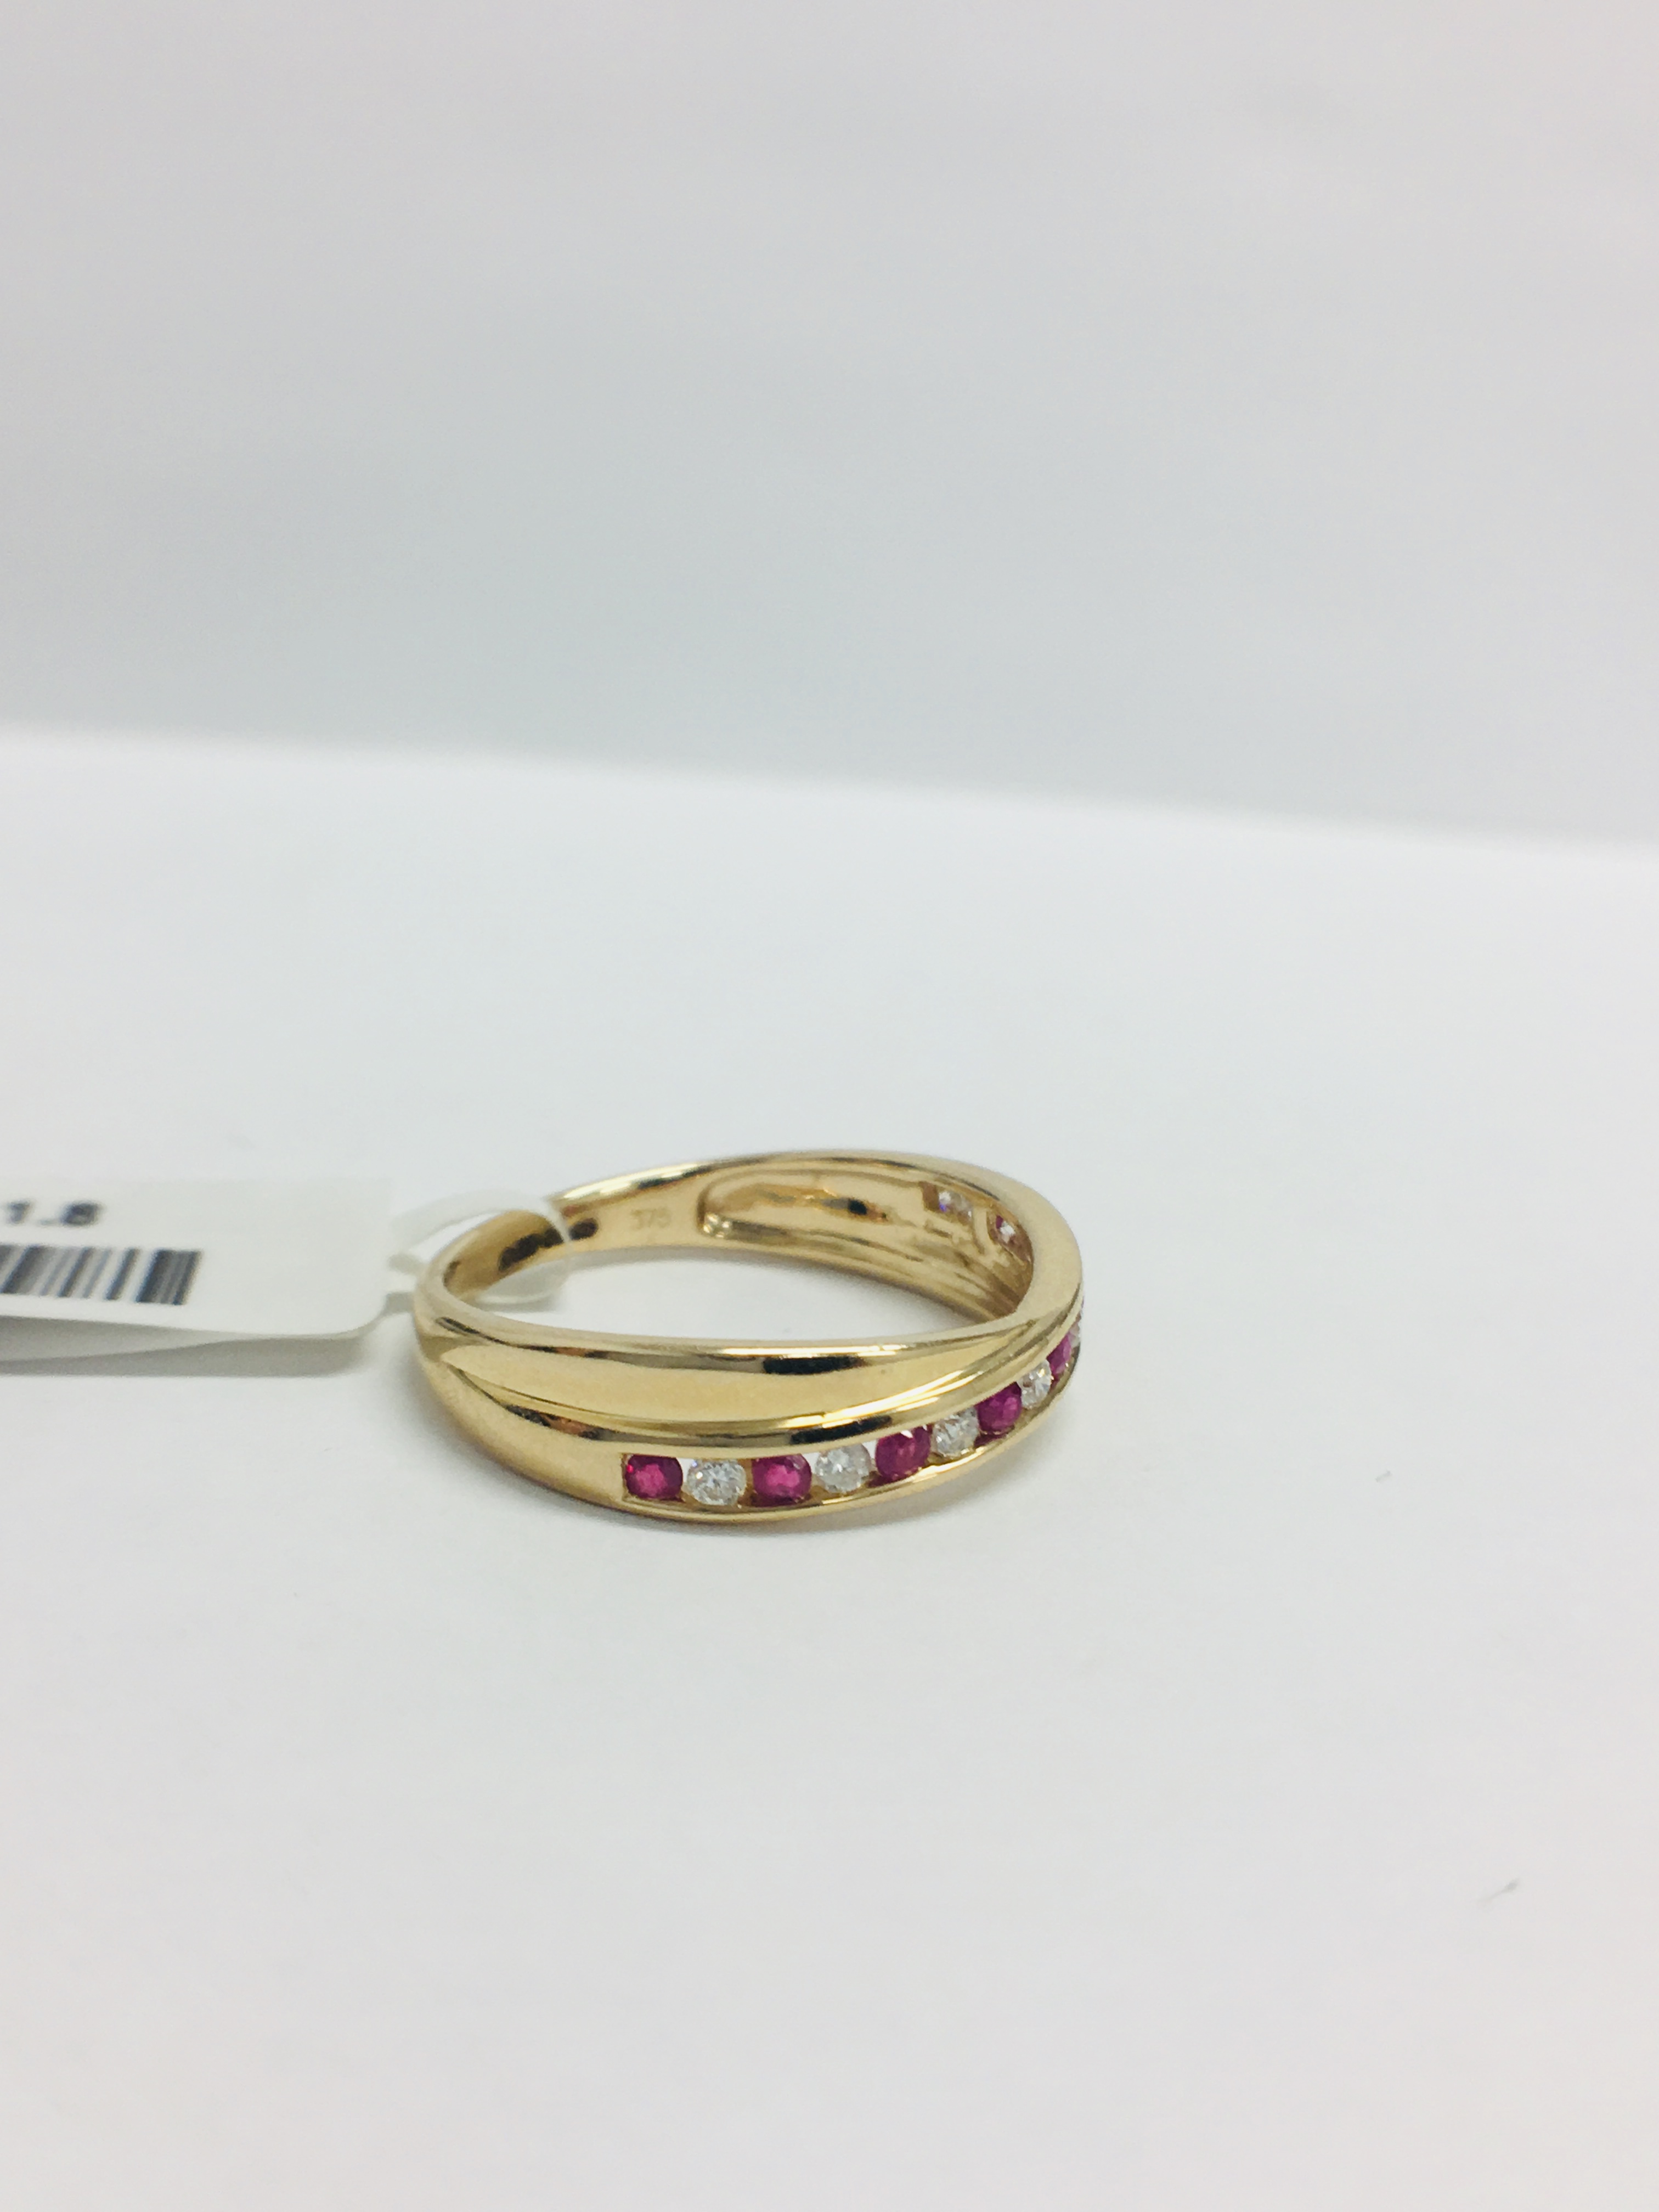 9Ct Yellow Gold Ruby Diamond Crossover Band Ring, - Image 6 of 8